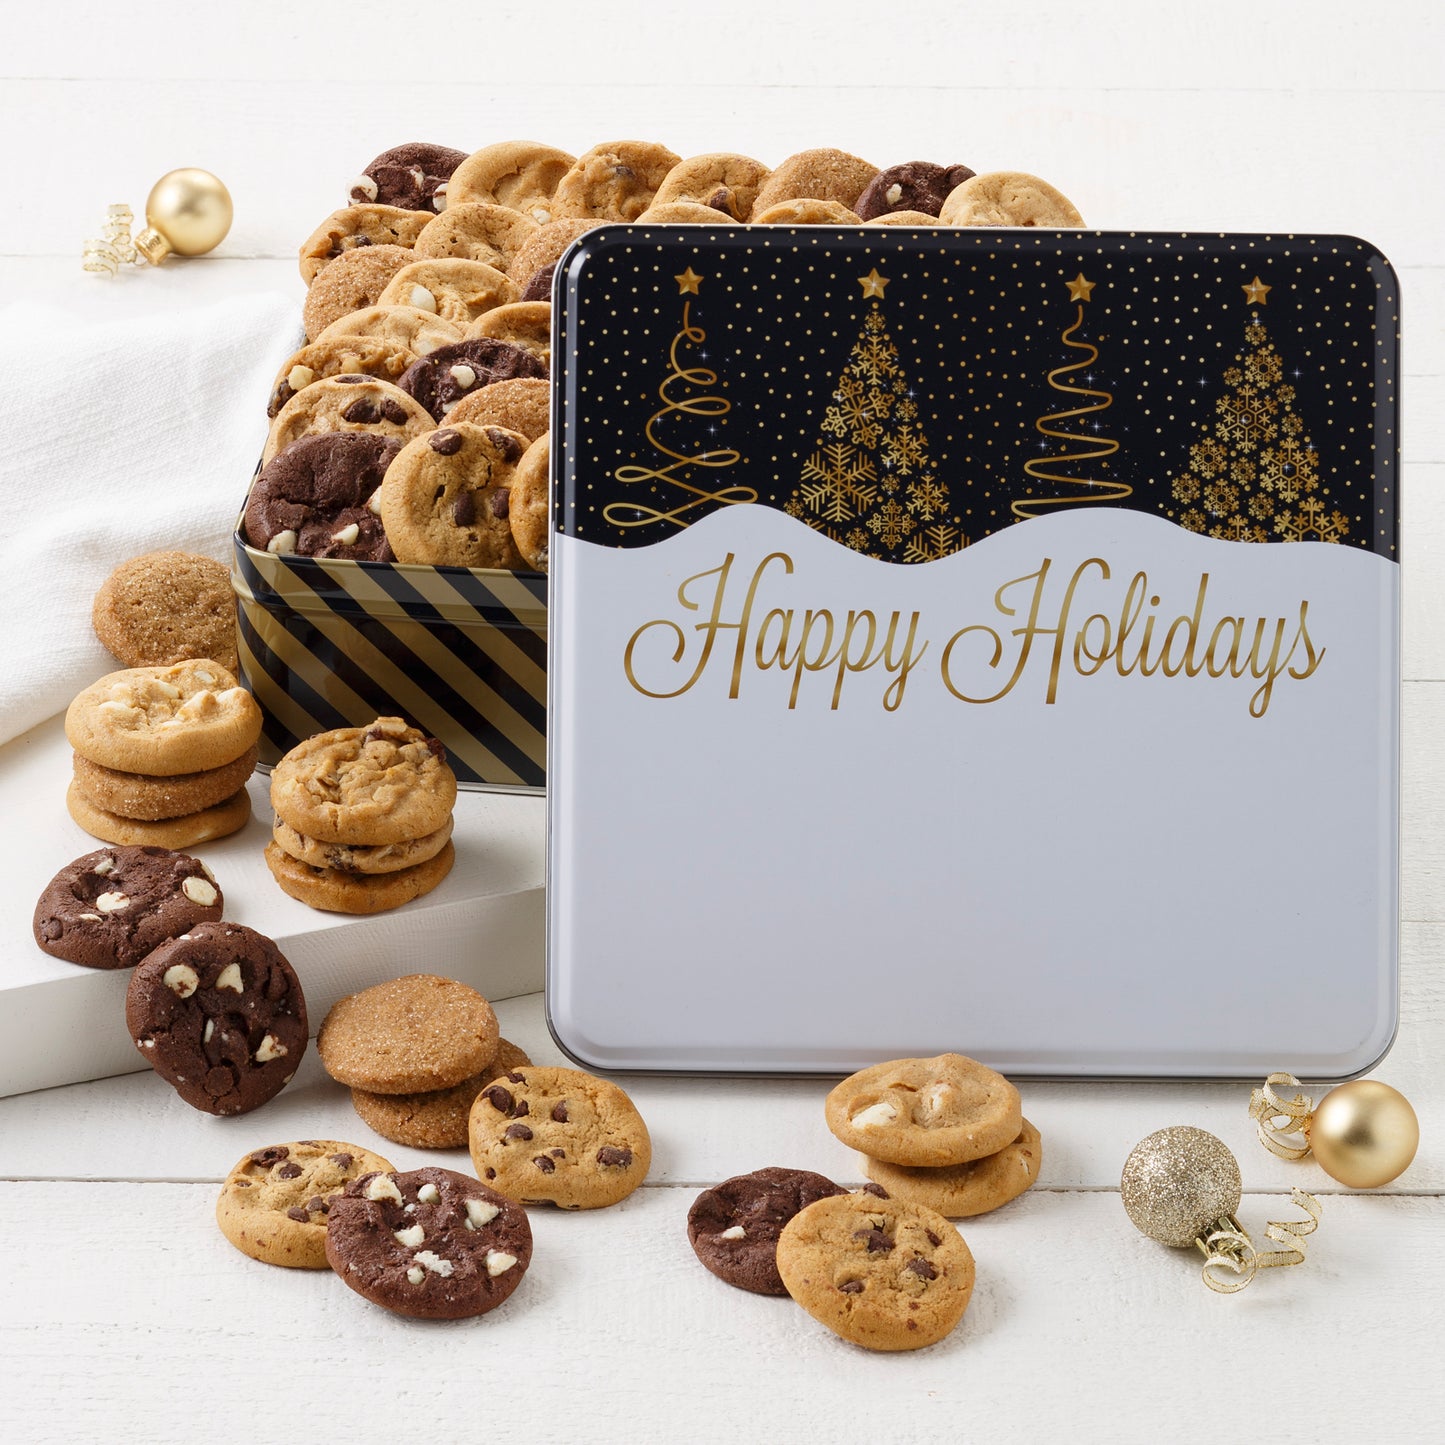 A Happy Holidays black and gold tin decorated with Christmas trees and filled with Nibblers®